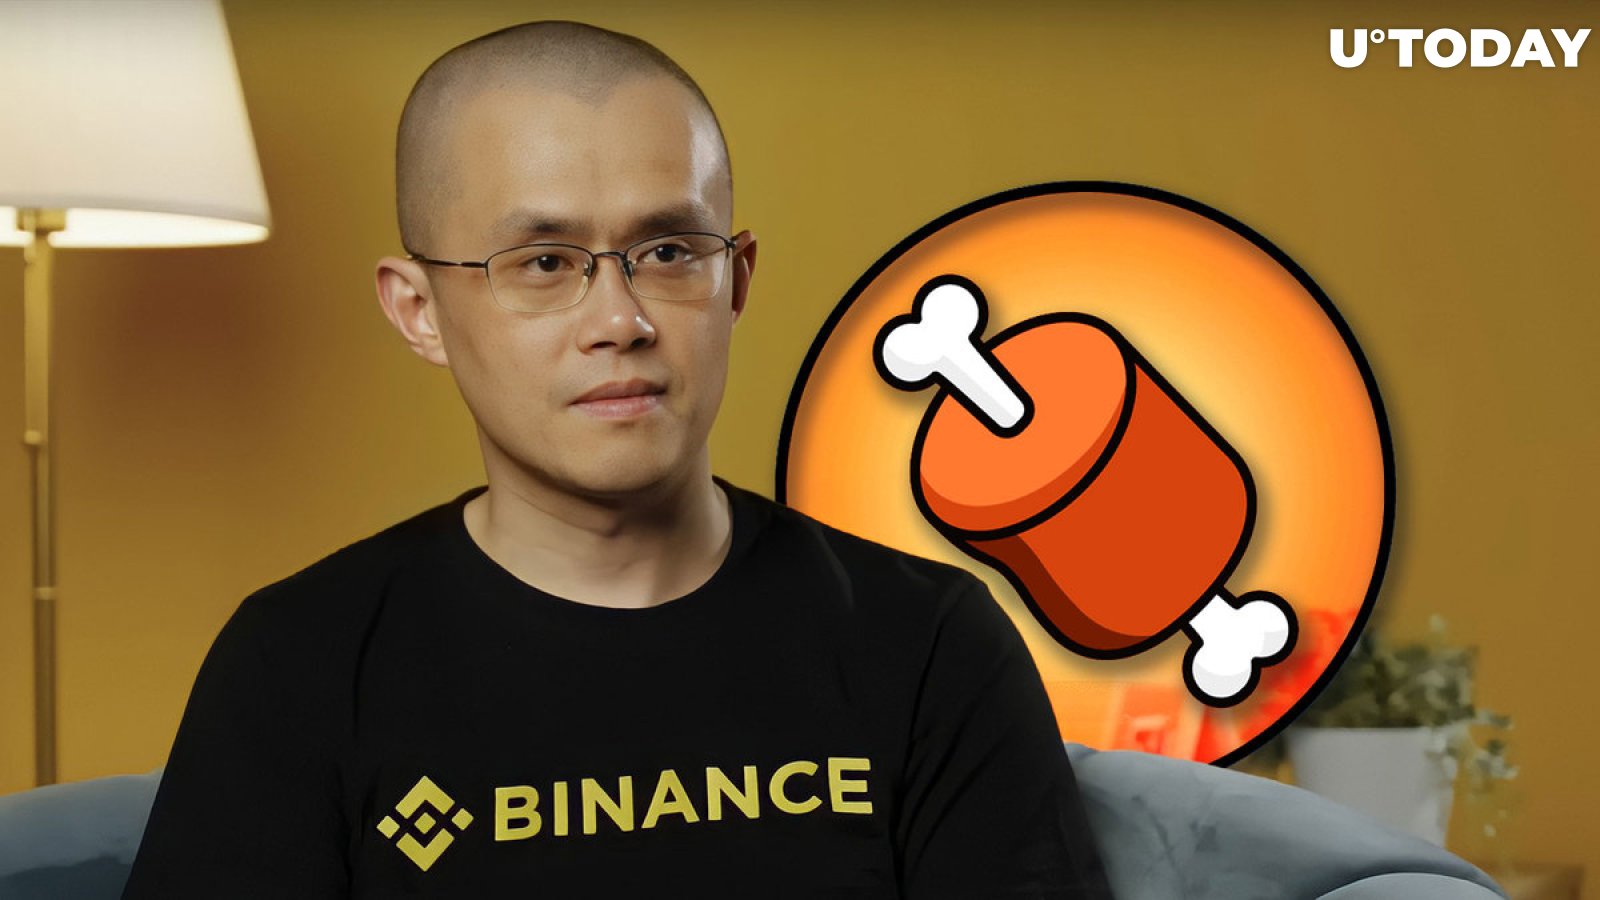 Is Shiba Inu's BONE Going to Be Listed on Binance? CEO CZ Speaks on Meme Coin Listing